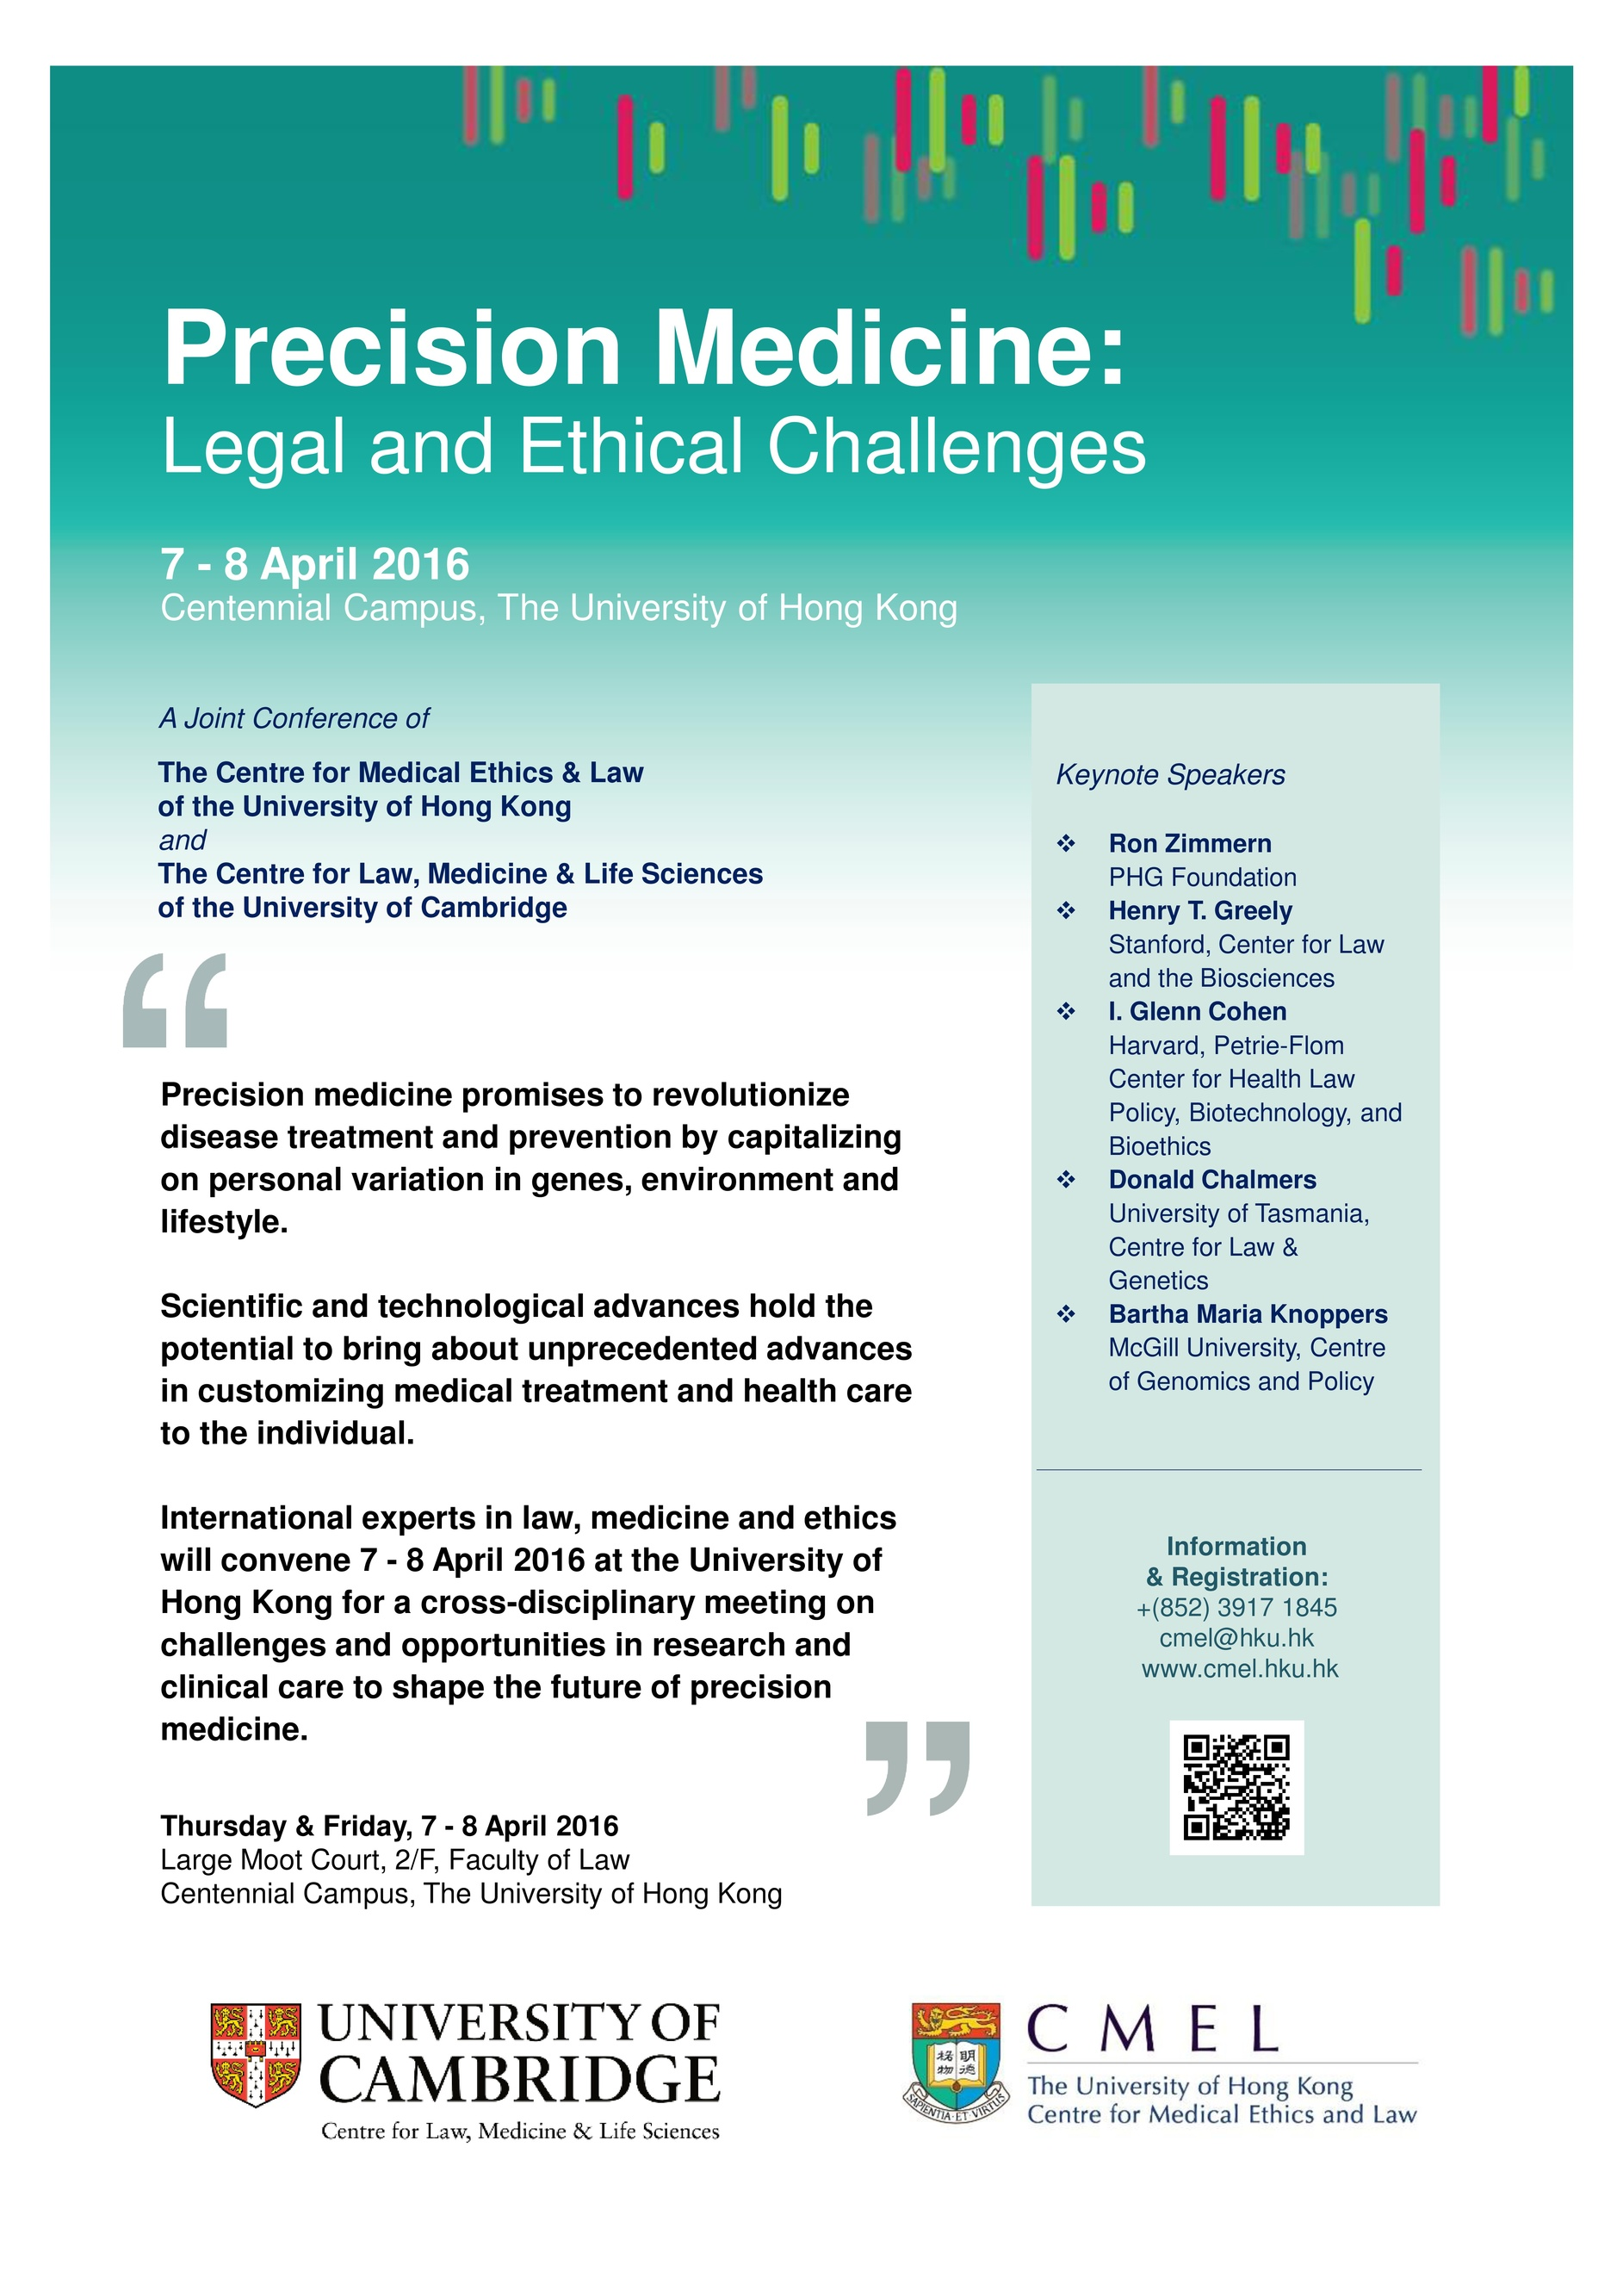 Precision Medicine: Legal and Ethical Challenges